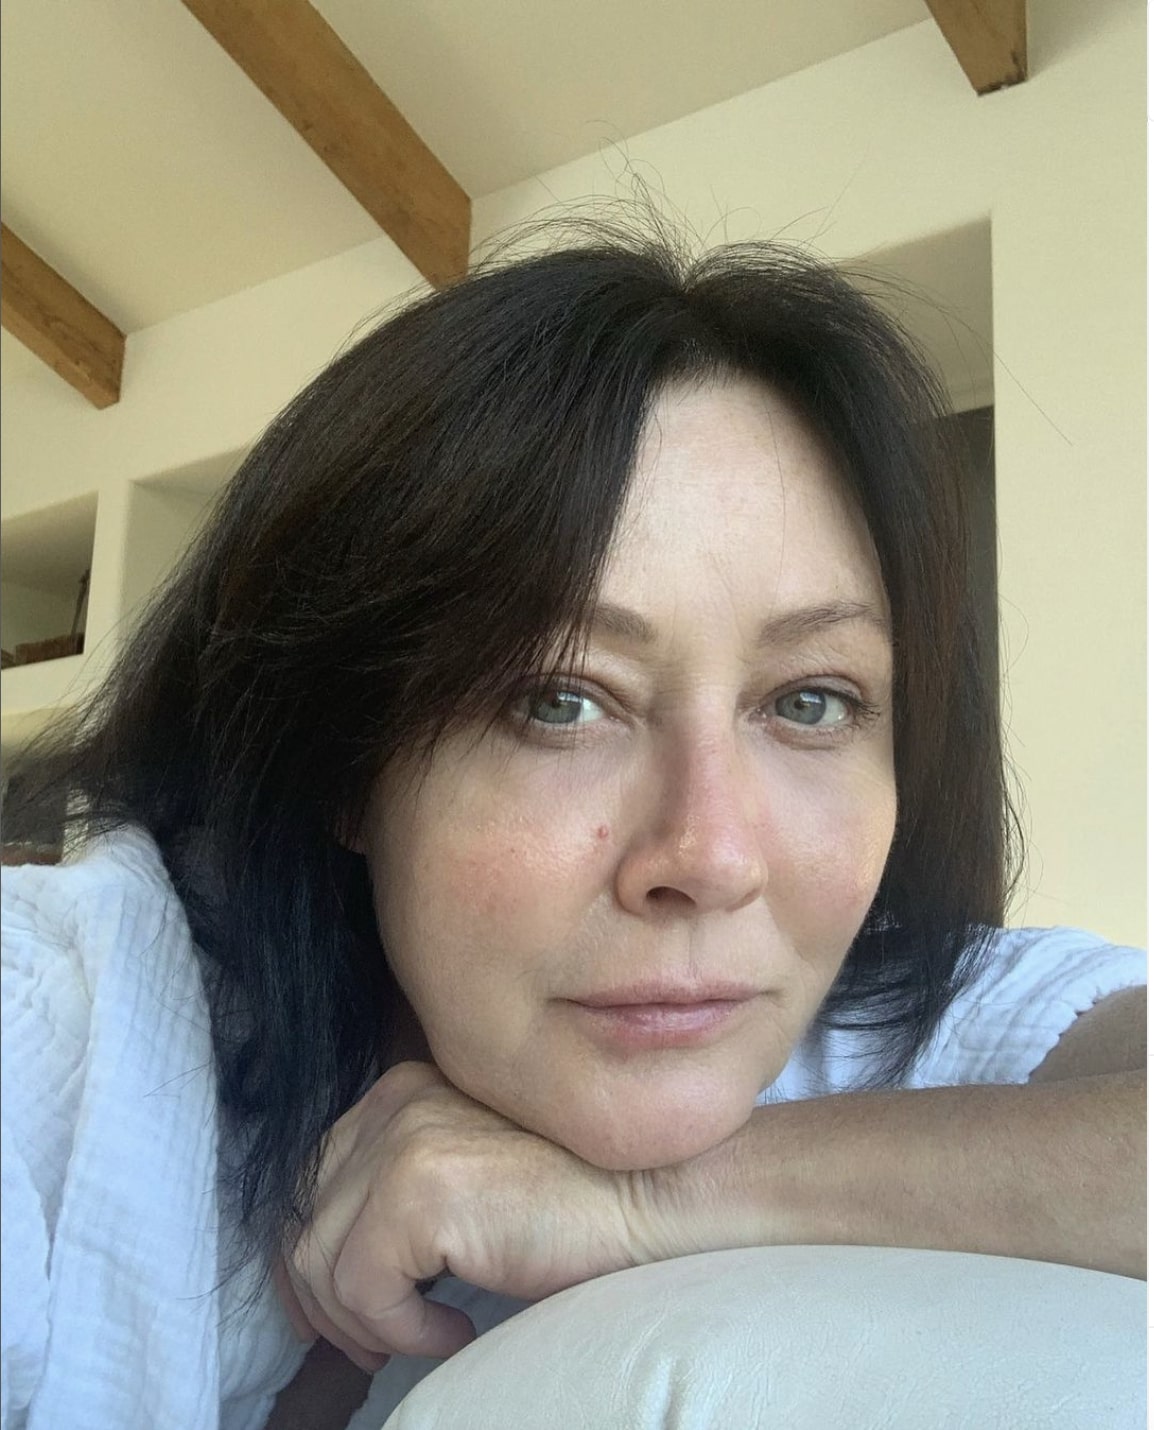 shannen-doherty-is-open-to-dating-again-amid-stage-4-cancer